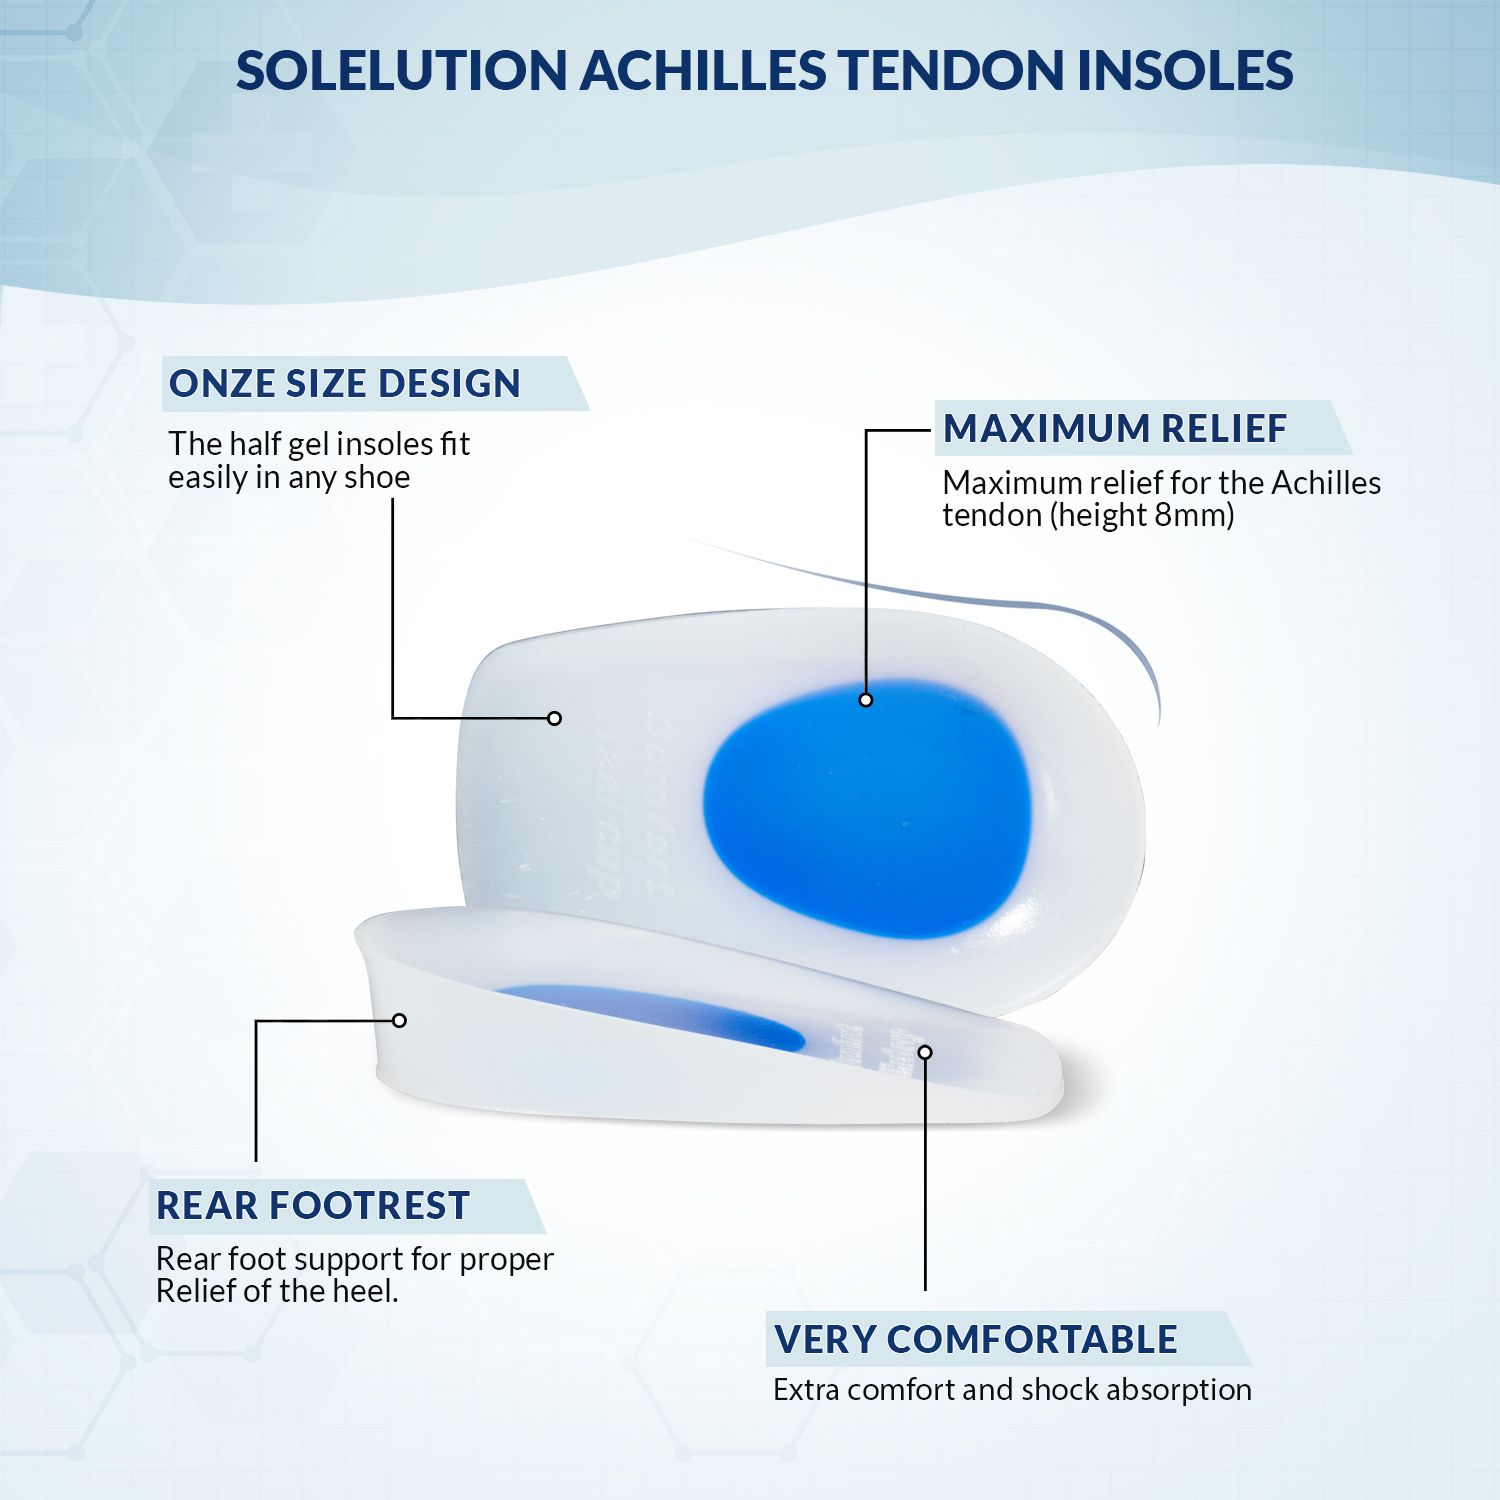 product information of the solelution achilles tendon insoles